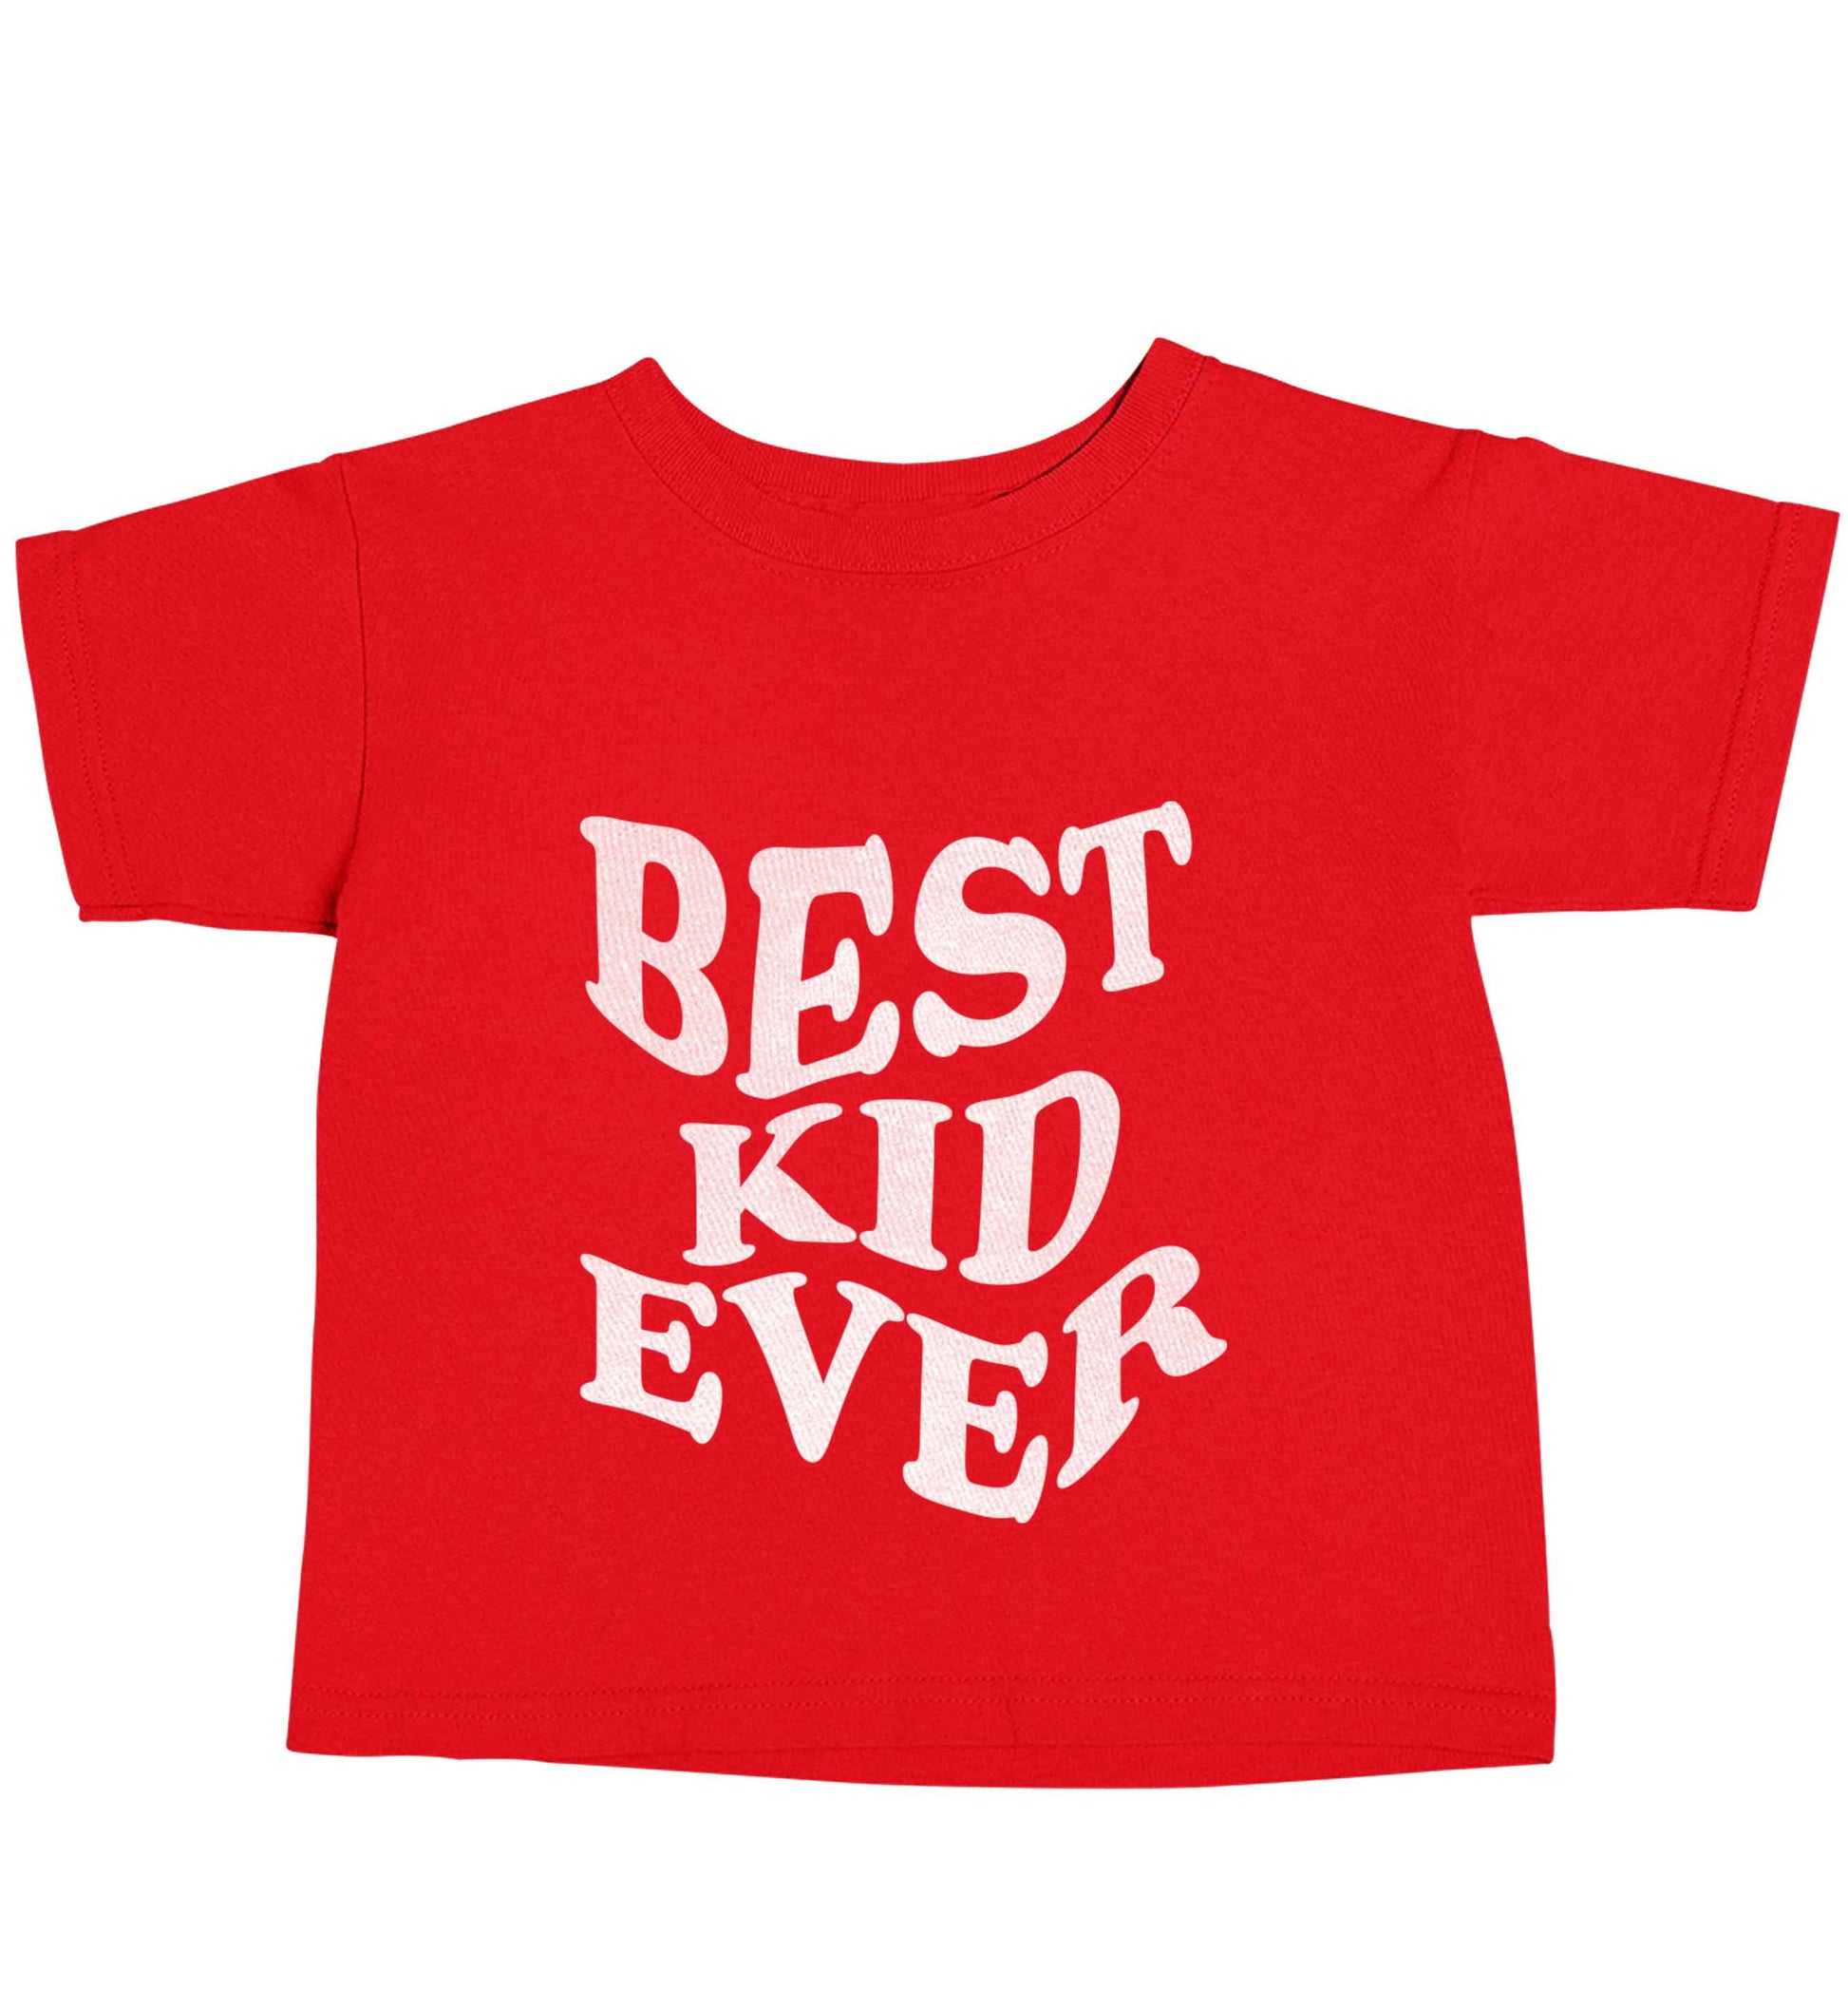 Best kid ever red baby toddler Tshirt 2 Years